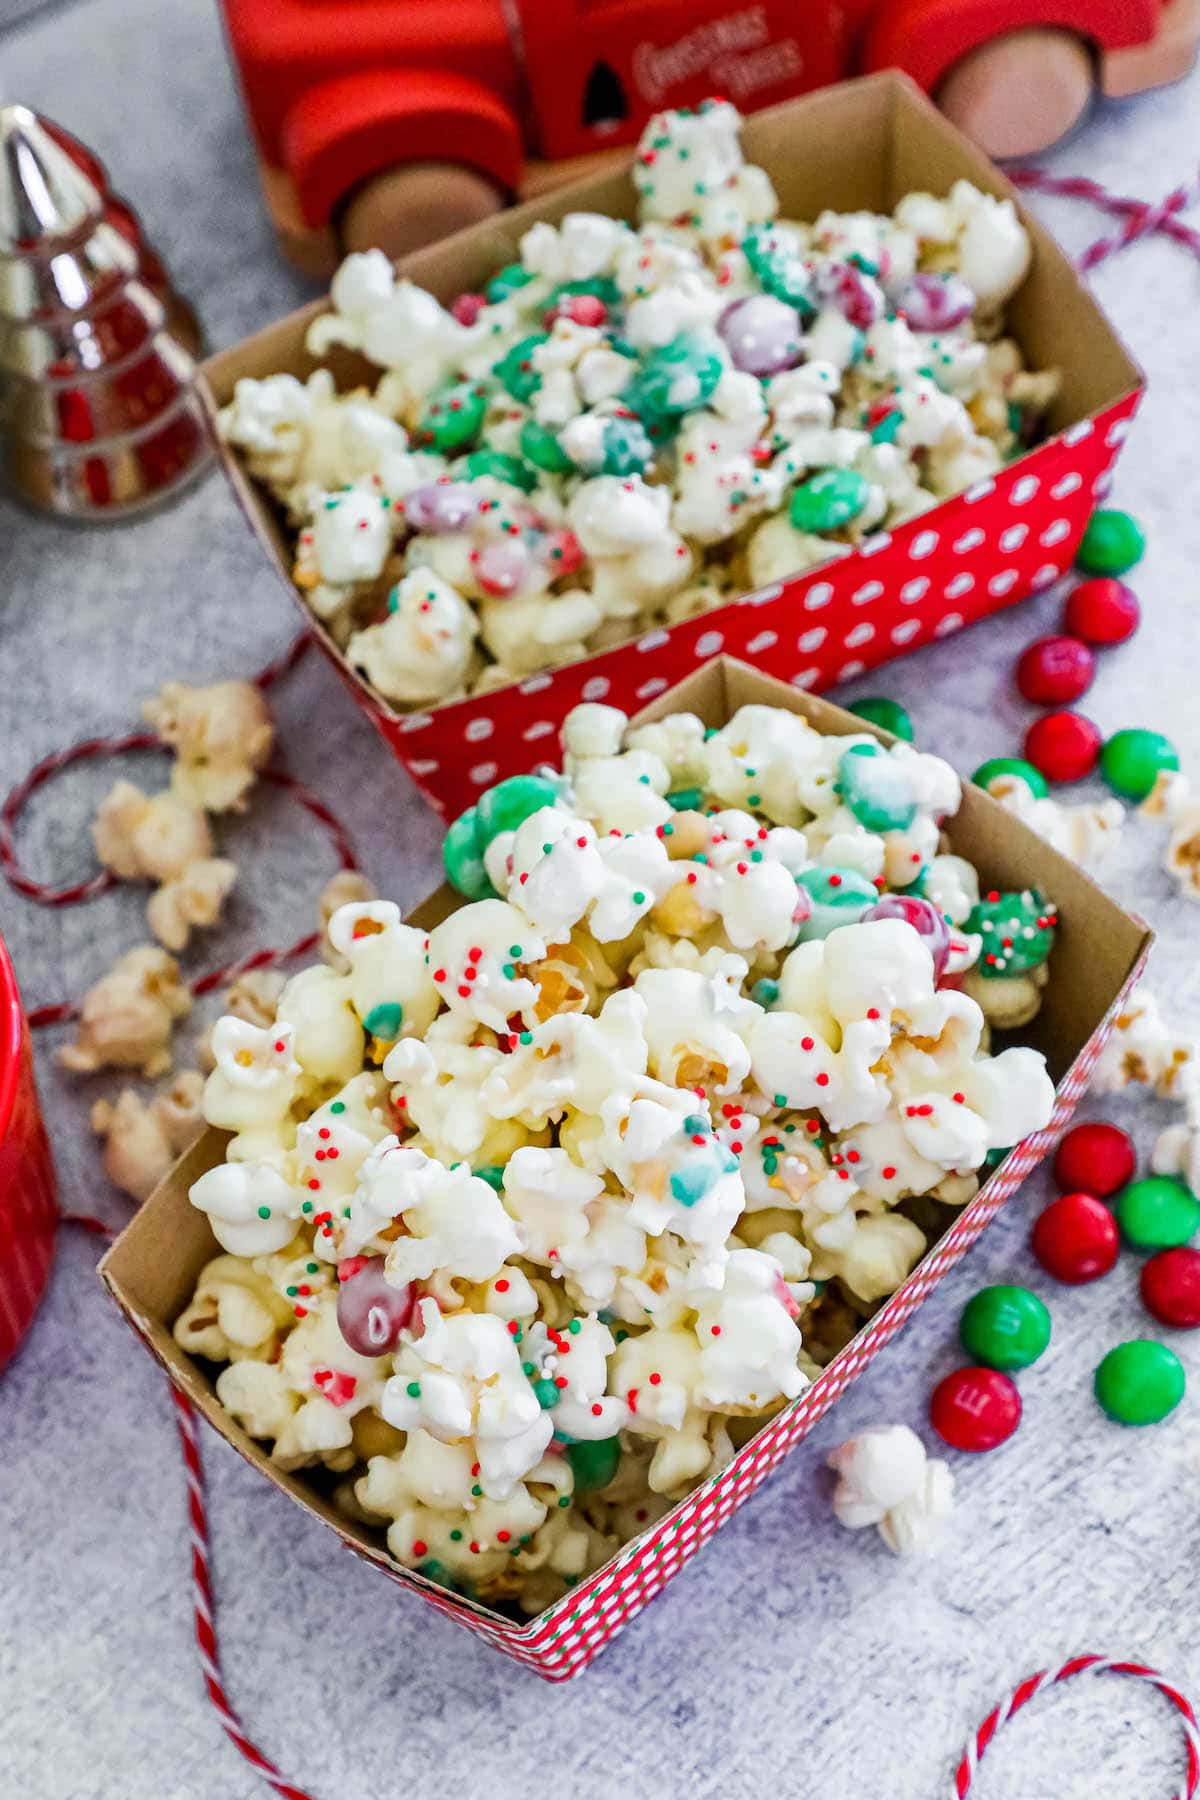 chocolate sprinkle popcorn with candies in a striped box.